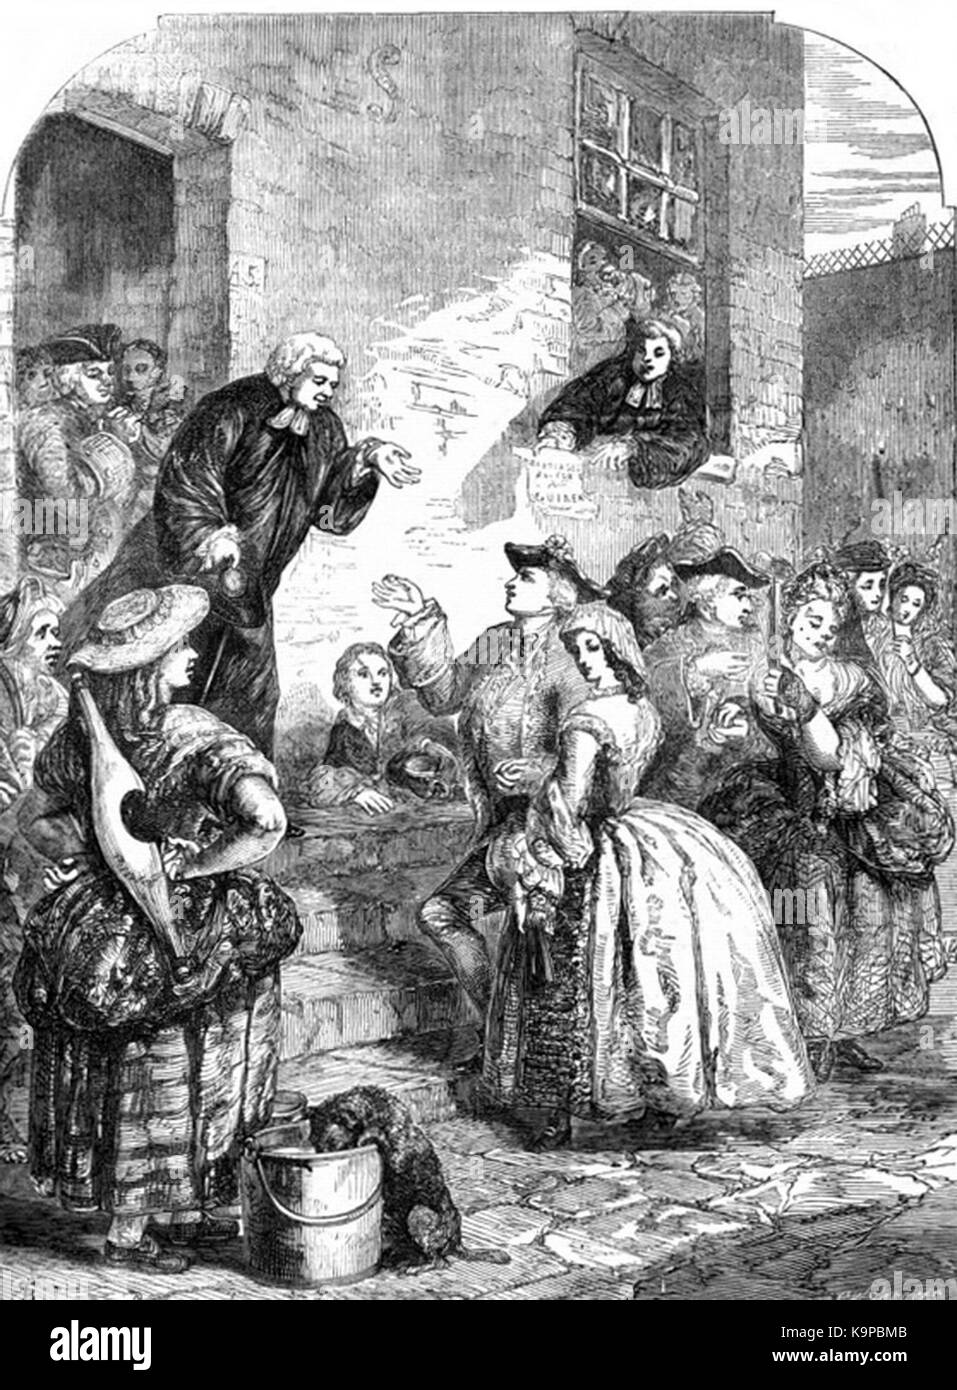 P547 Fleet Marriages Scene in the Fleet Prison during the Reign of ...